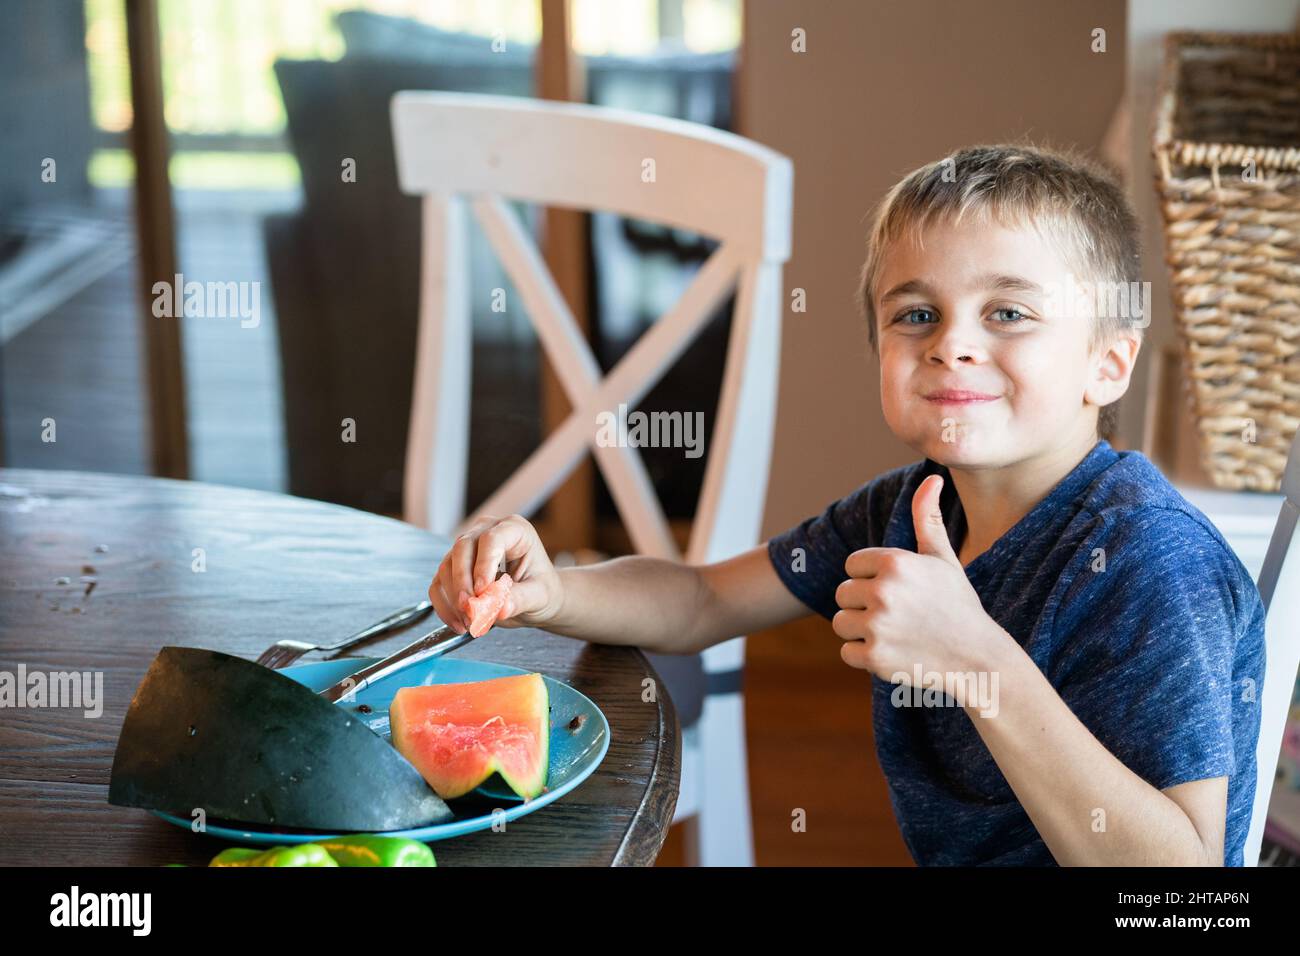 Little boy eating a watermelon with pleasure Stock Photo